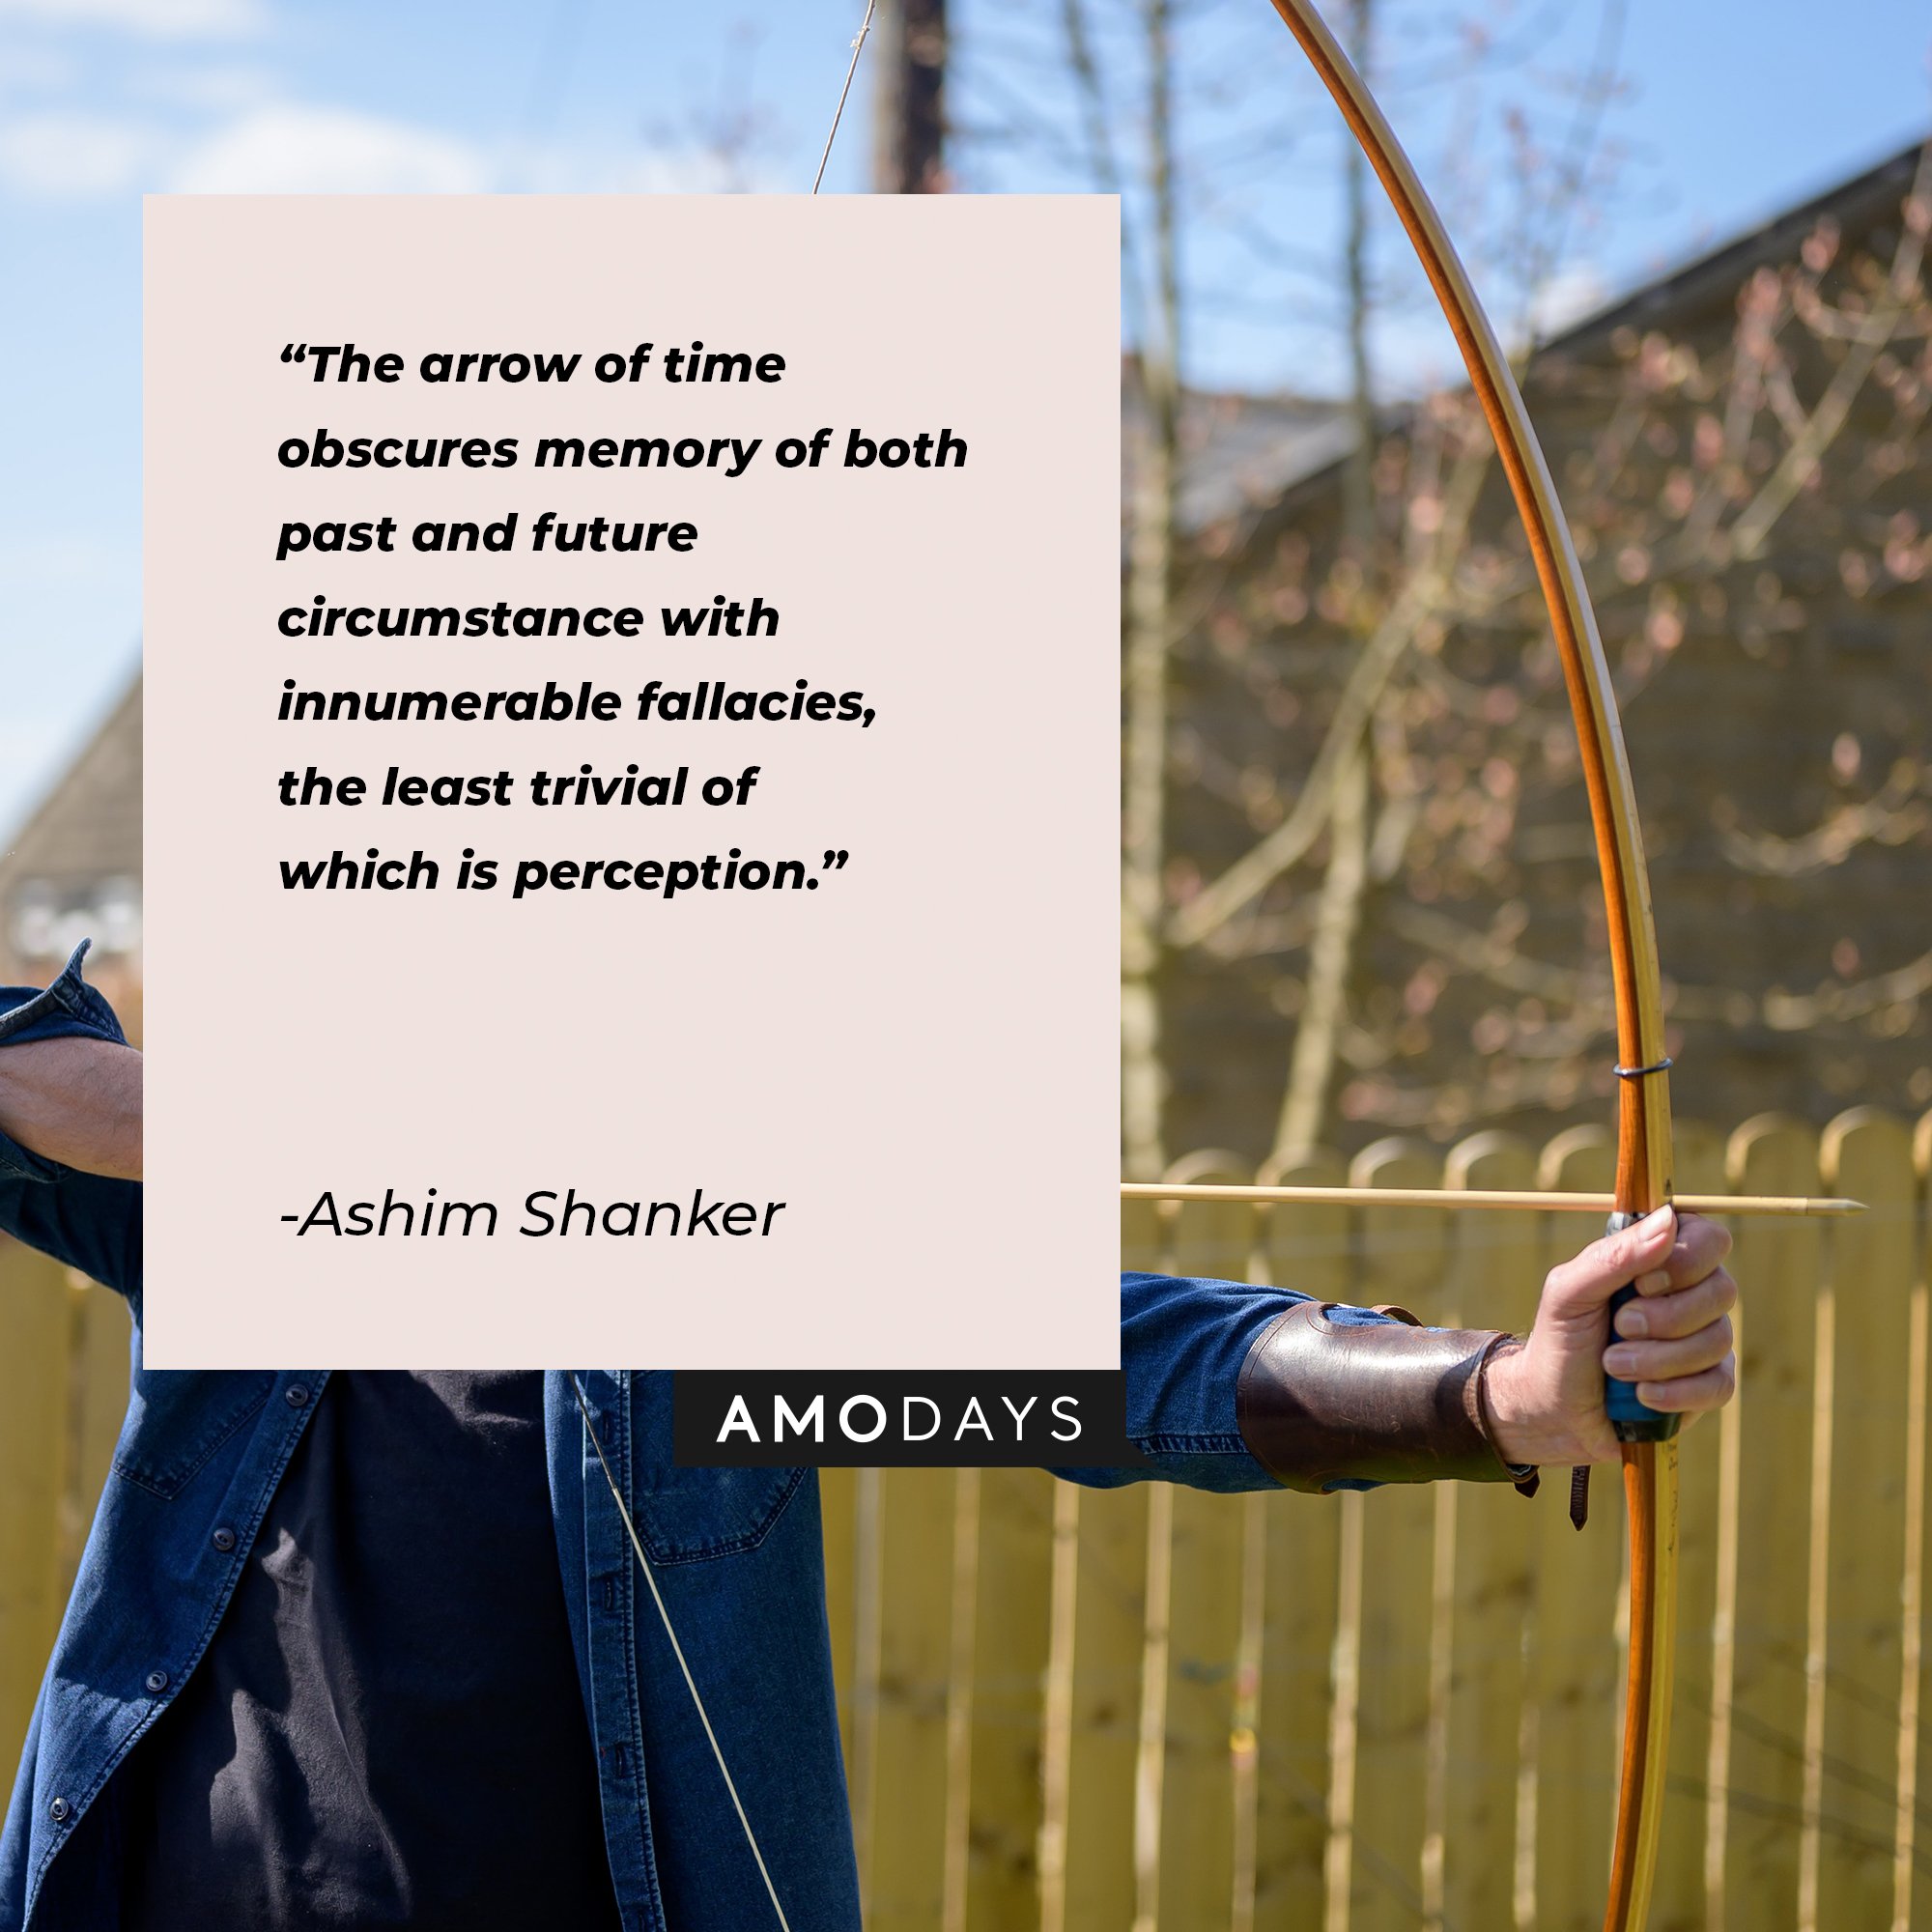 Ashim Shanker’s quote: “The arrow of time obscures memory of both past and future circumstance with innumerable fallacies, the least trivial of which is perception.” | Image: AmoDays